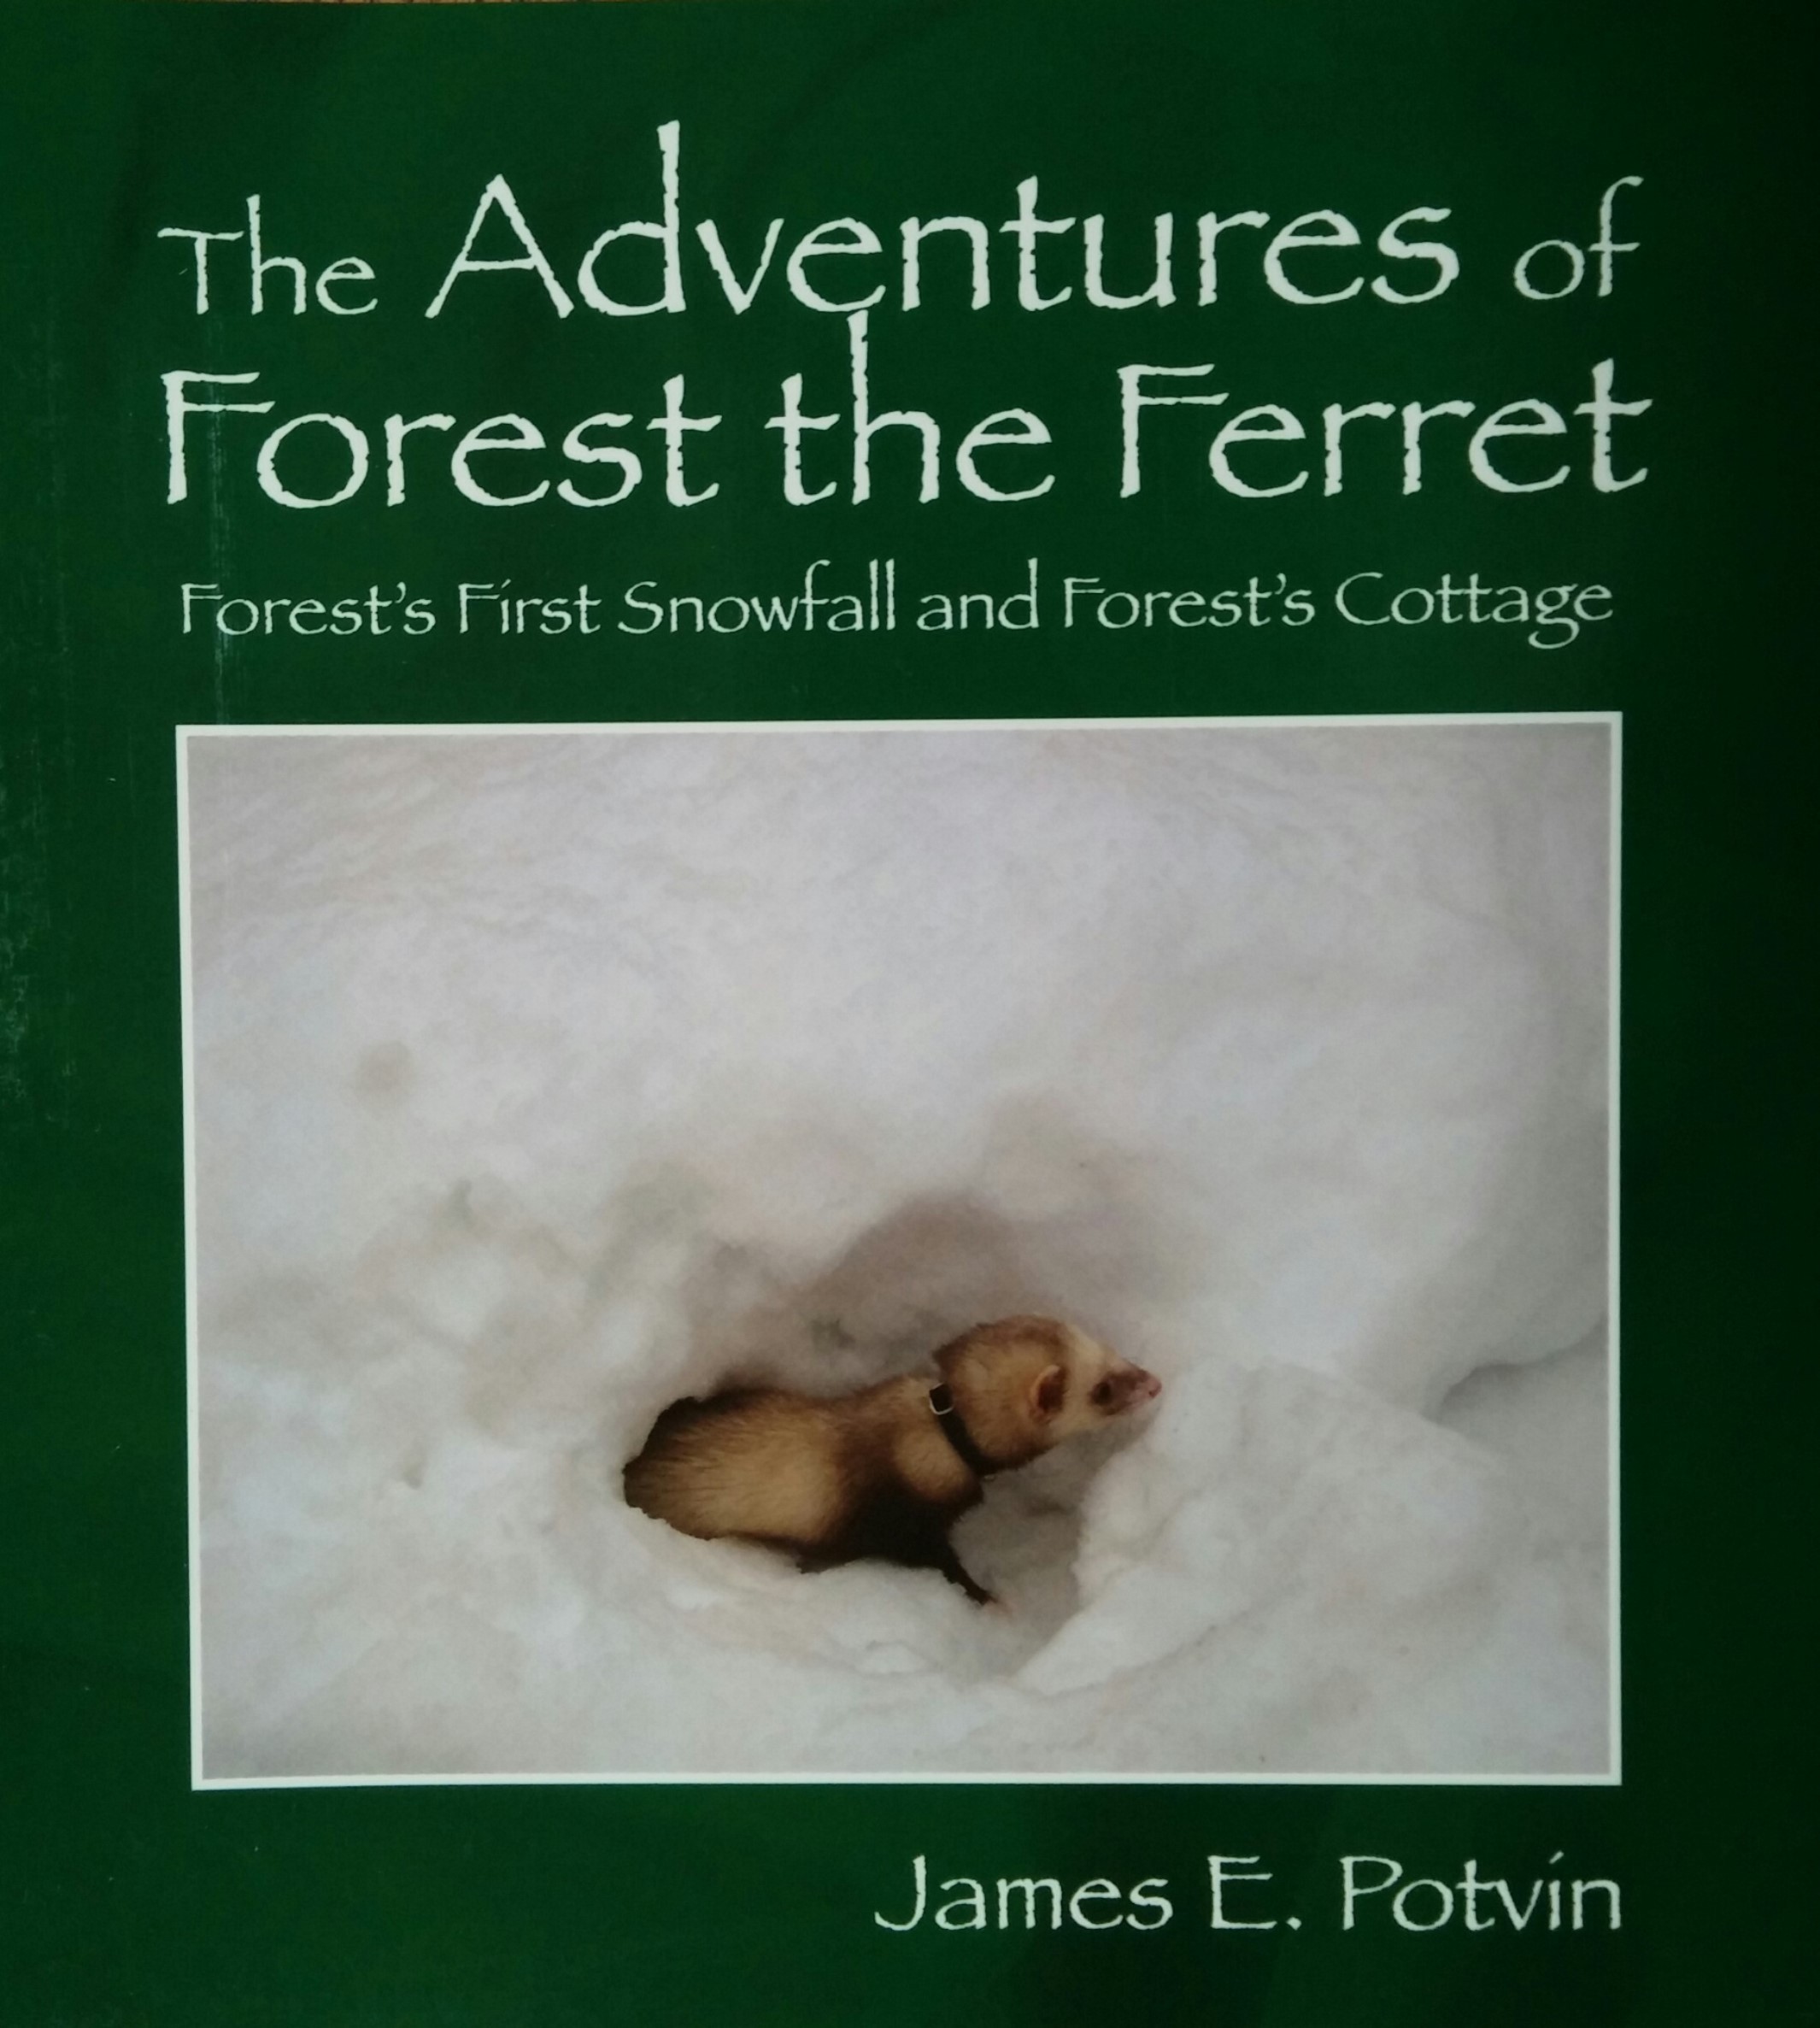 The Adventures of Forest the Ferret by author James E. Potvin